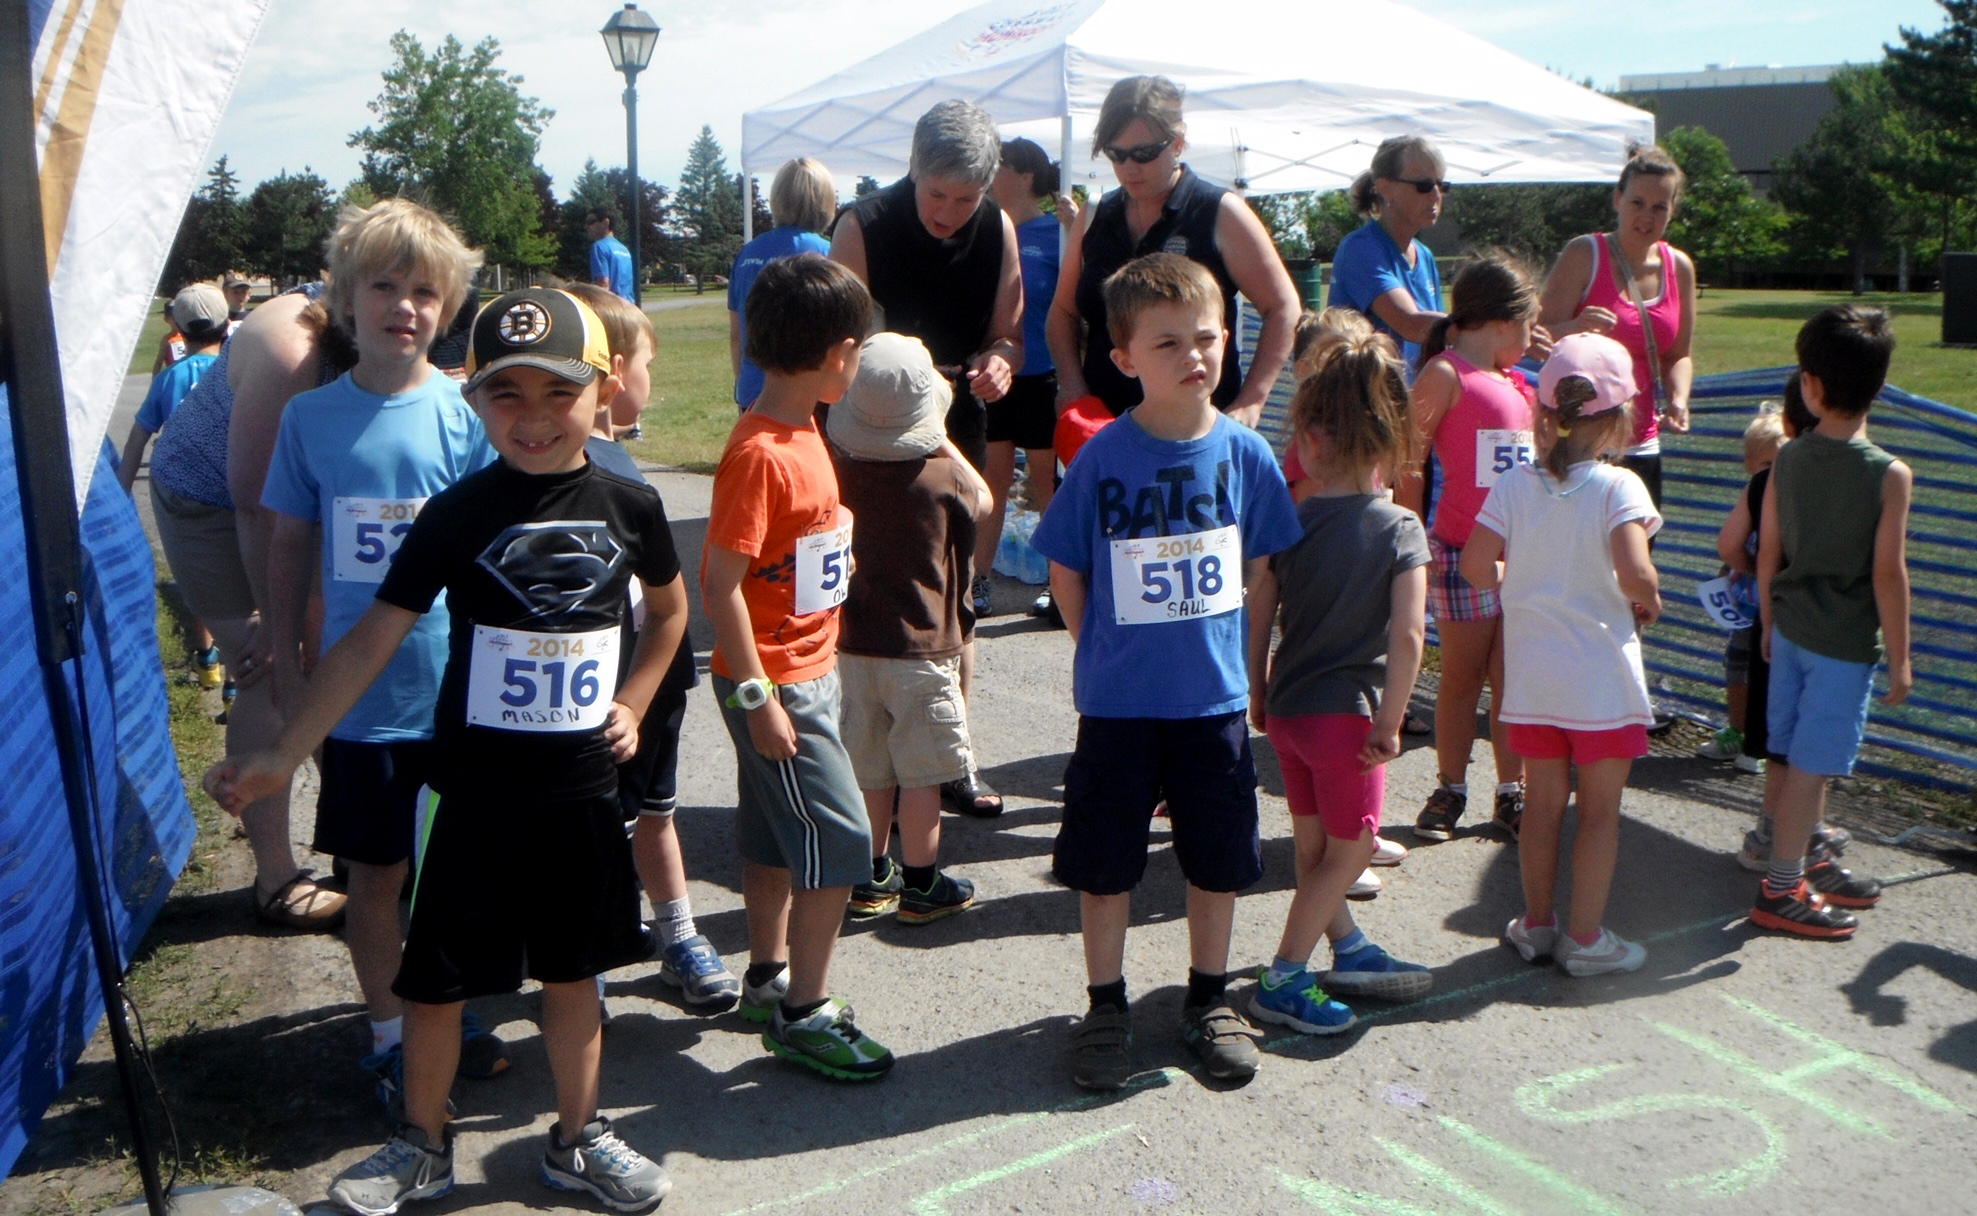 Kids’ event promotes healthy lifestyles, sense of accomplishment and lots of fun!